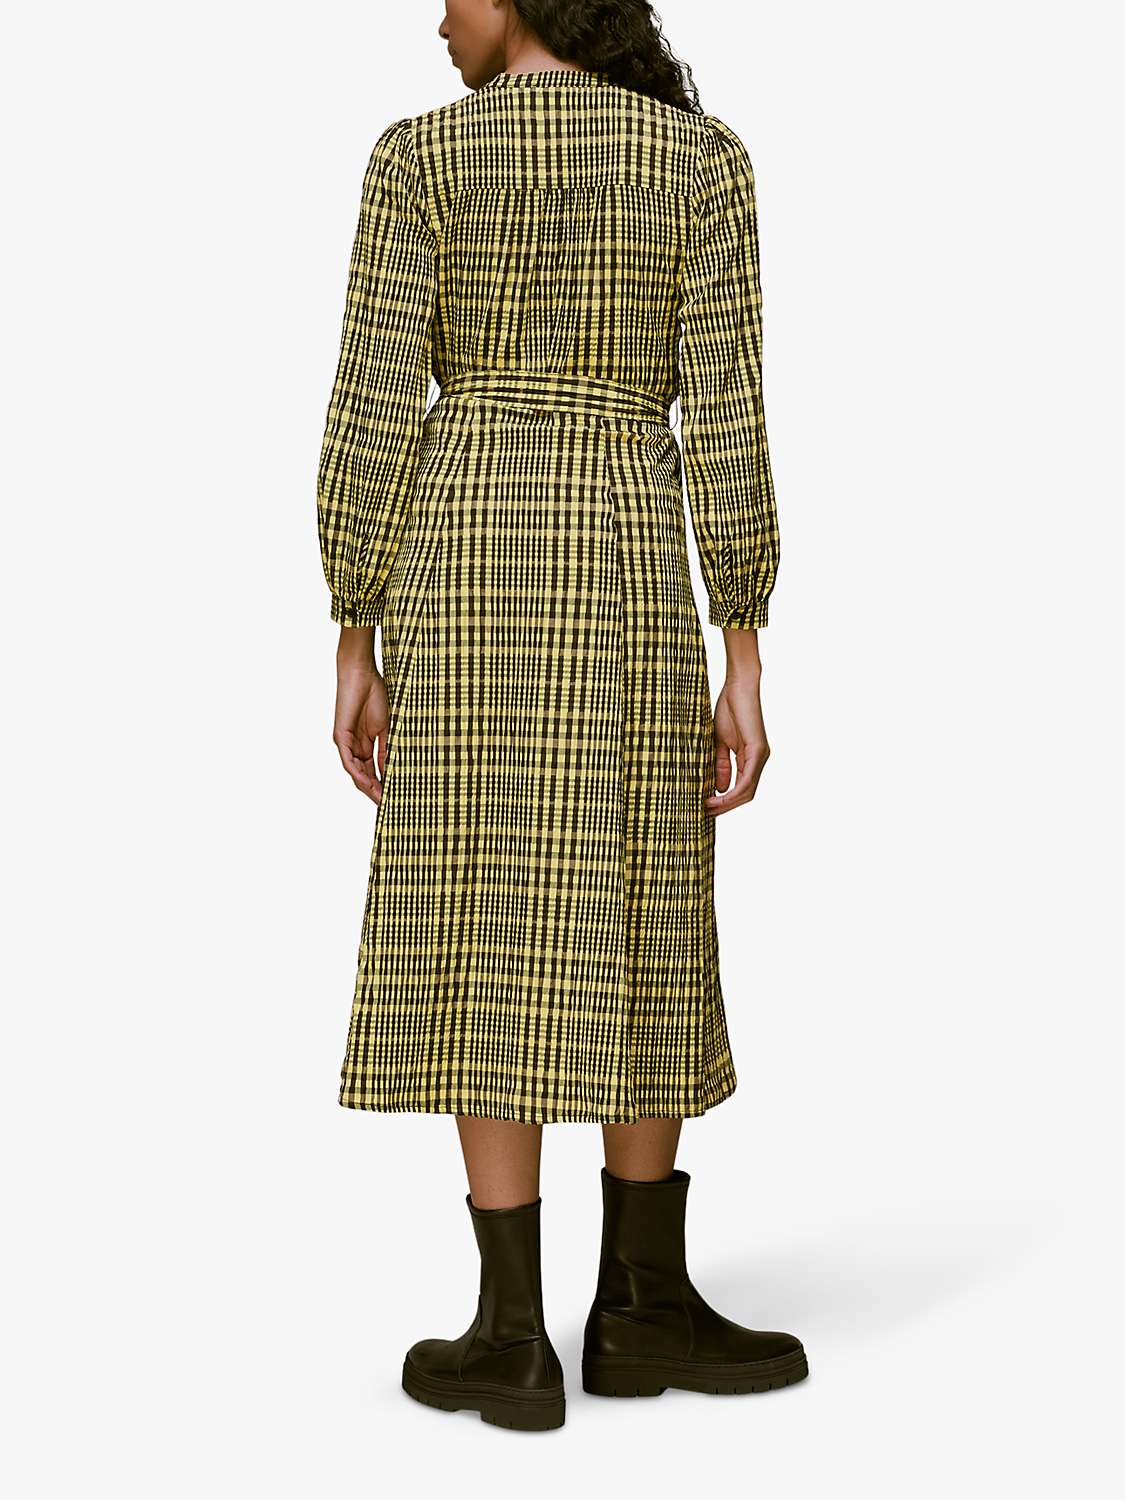 Buy Whistles Nora Gingham Check Dress, Yellow/Multi Online at johnlewis.com